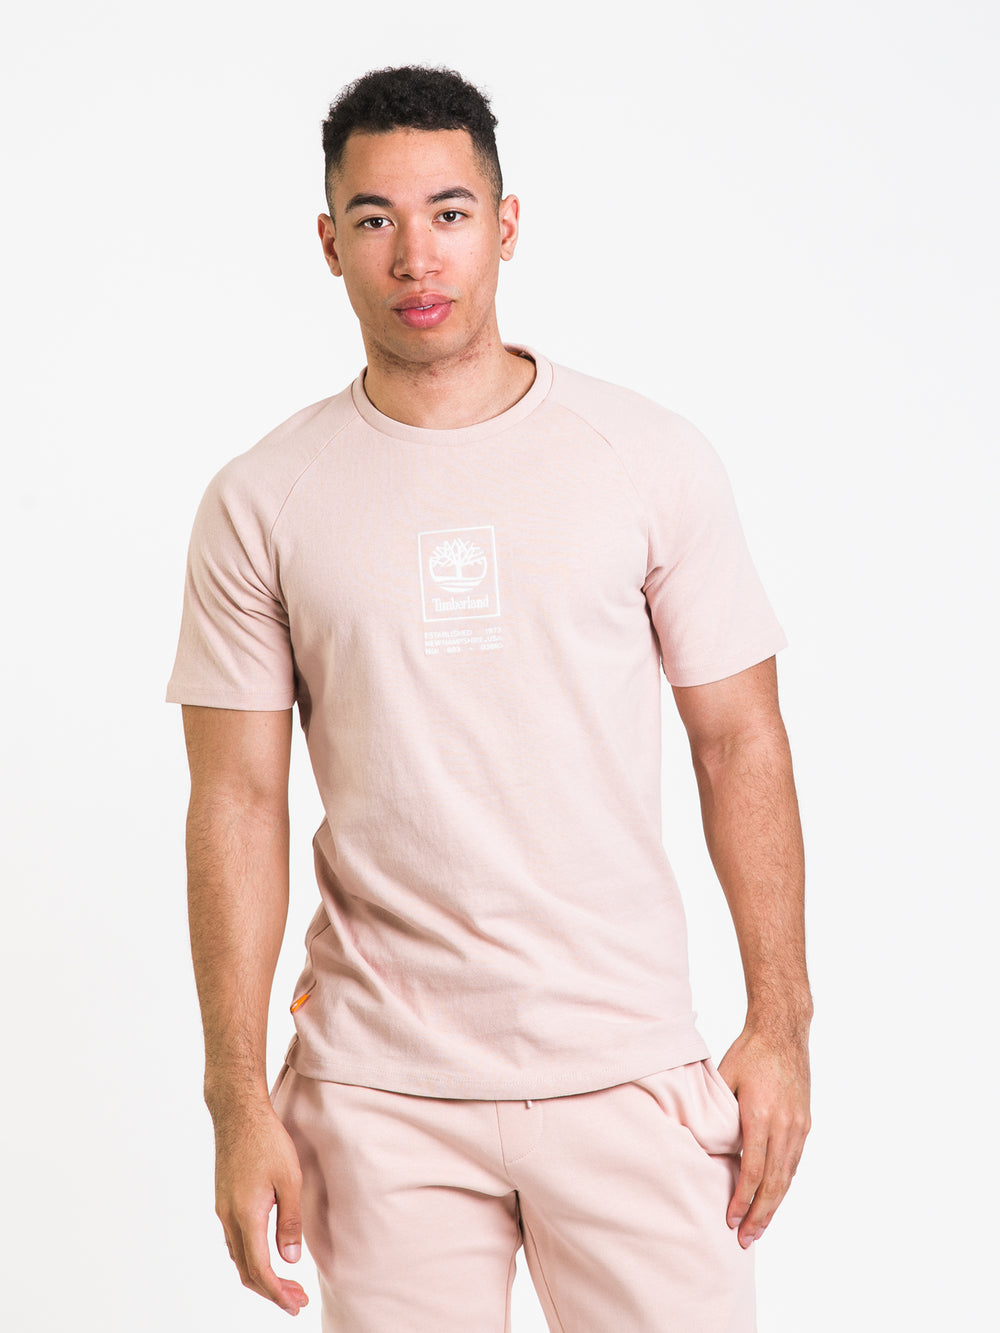 TIMBERLAND HEAVYWEIGHT STACK EMBROIDERED LOGO T-SHIRT - CLEARANCE